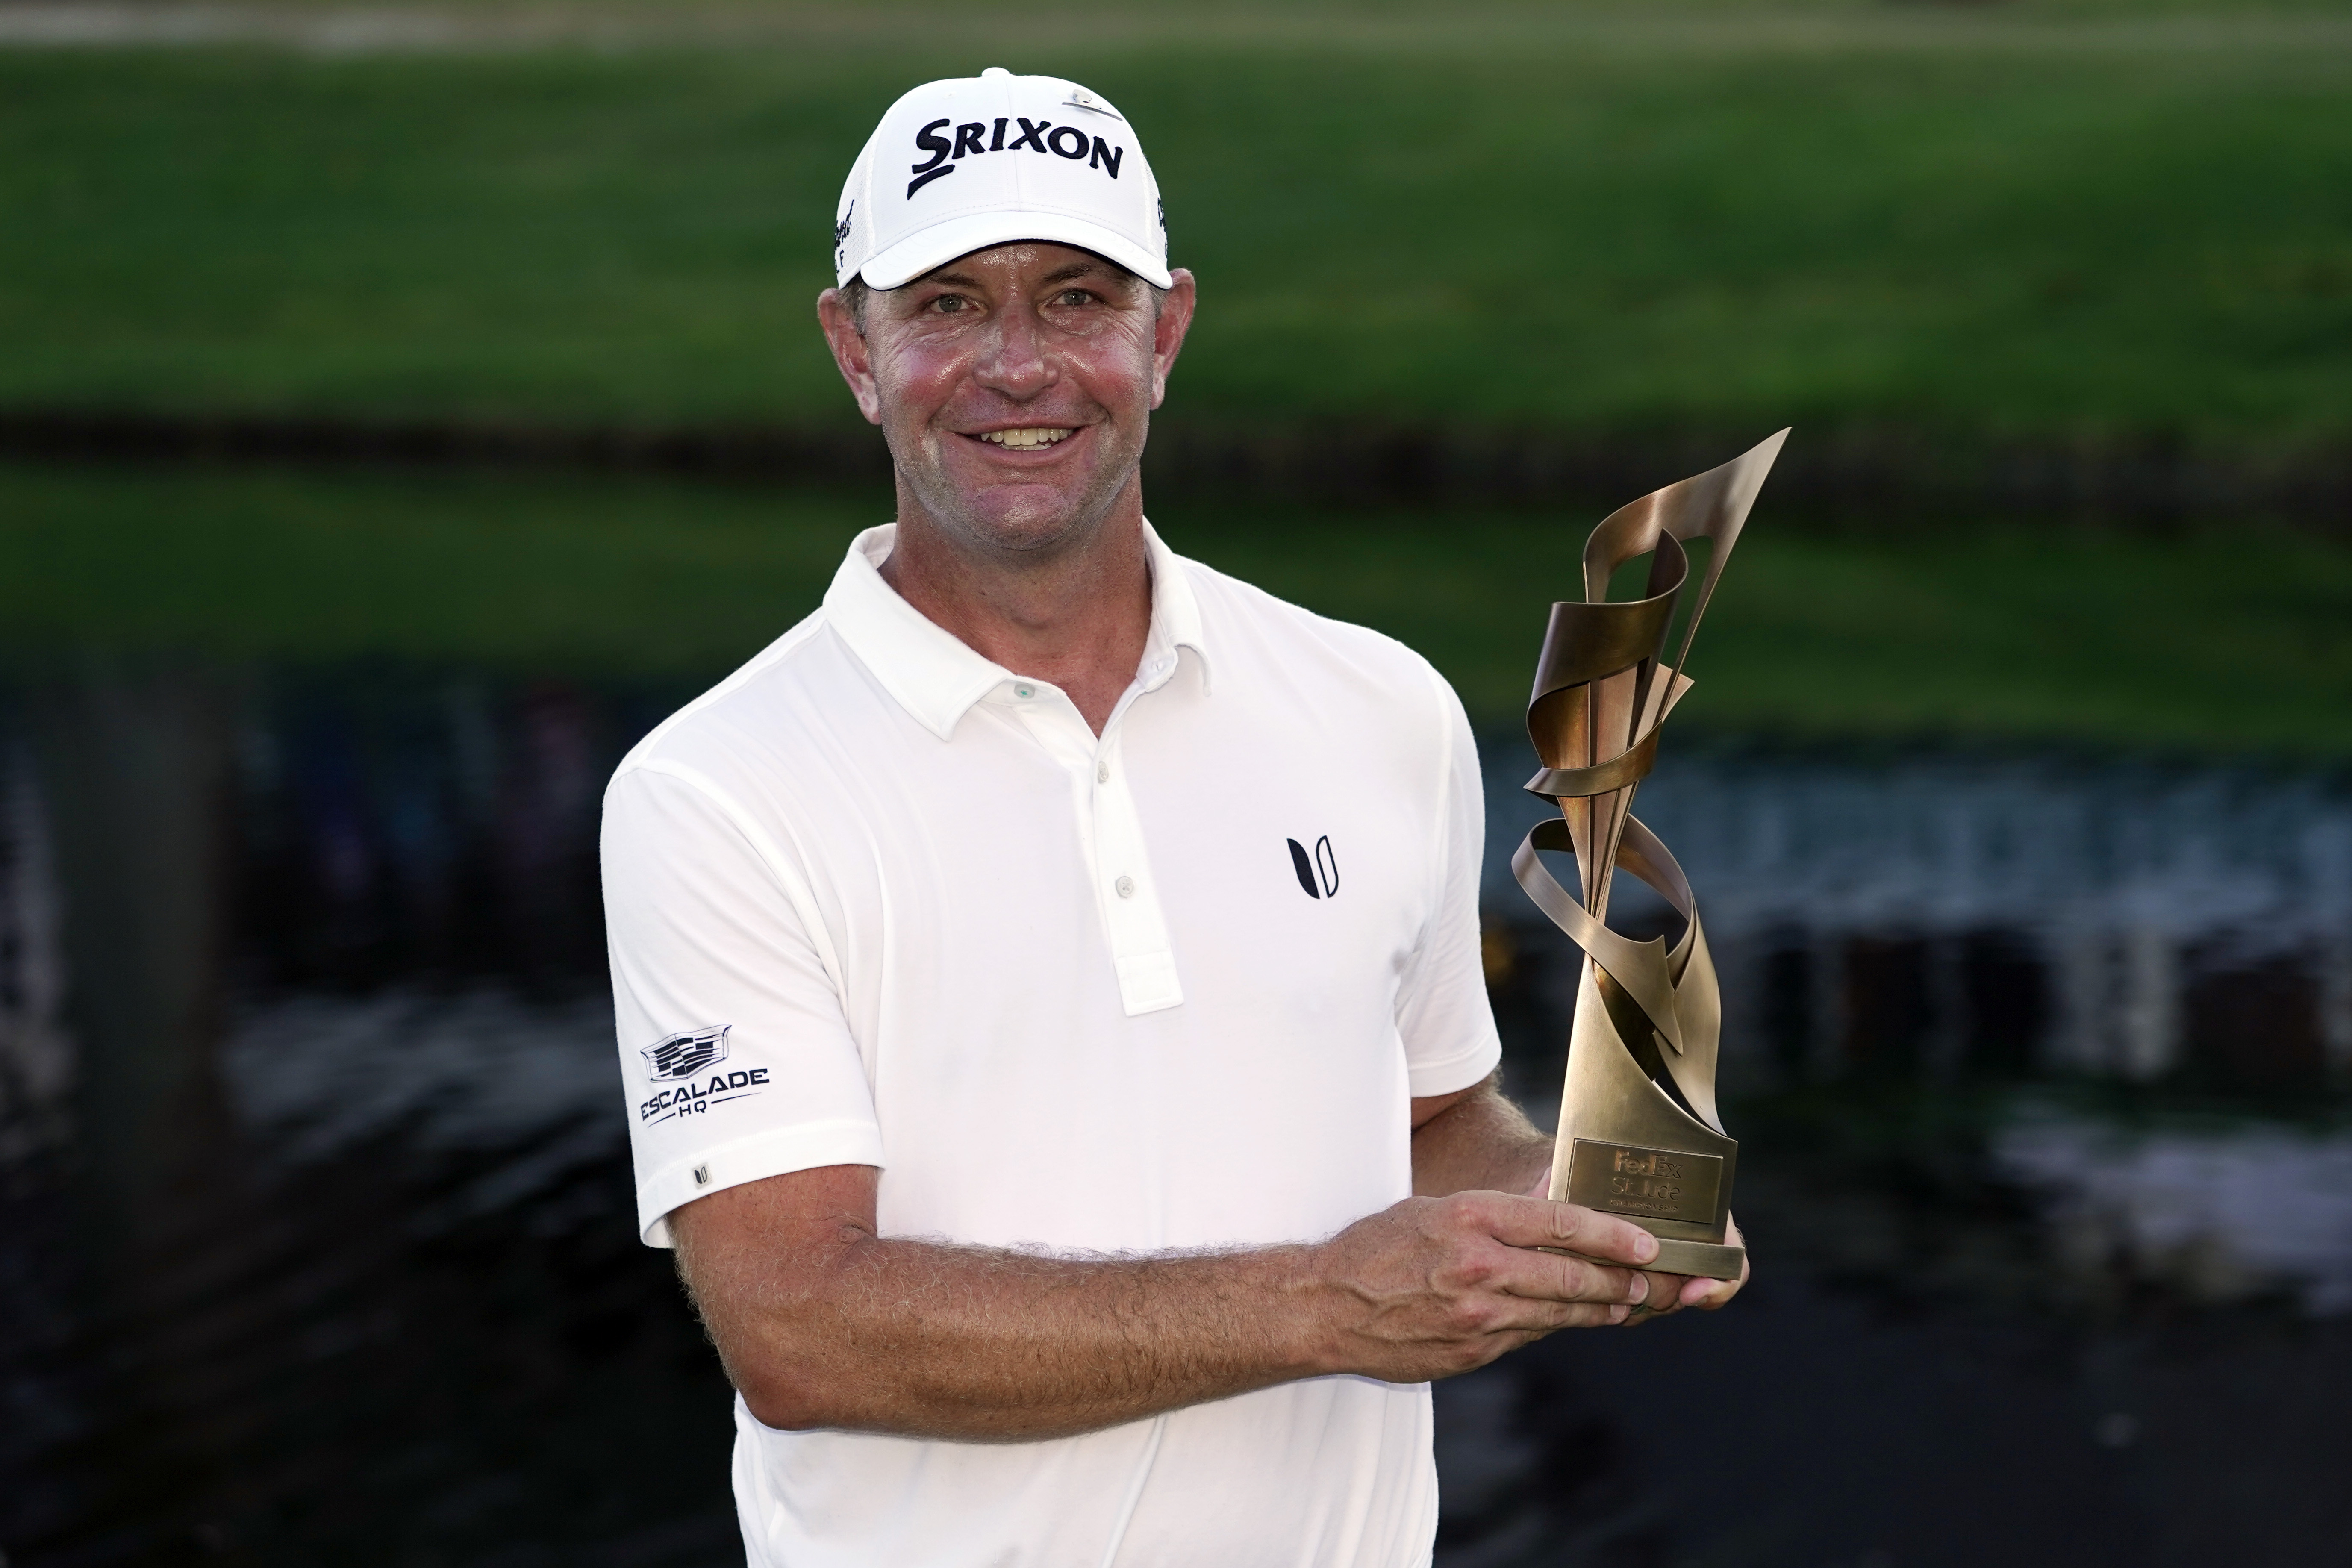 Glover makes it 2 in a row by winning FedEx Cup opener in a playoff over Cantlay